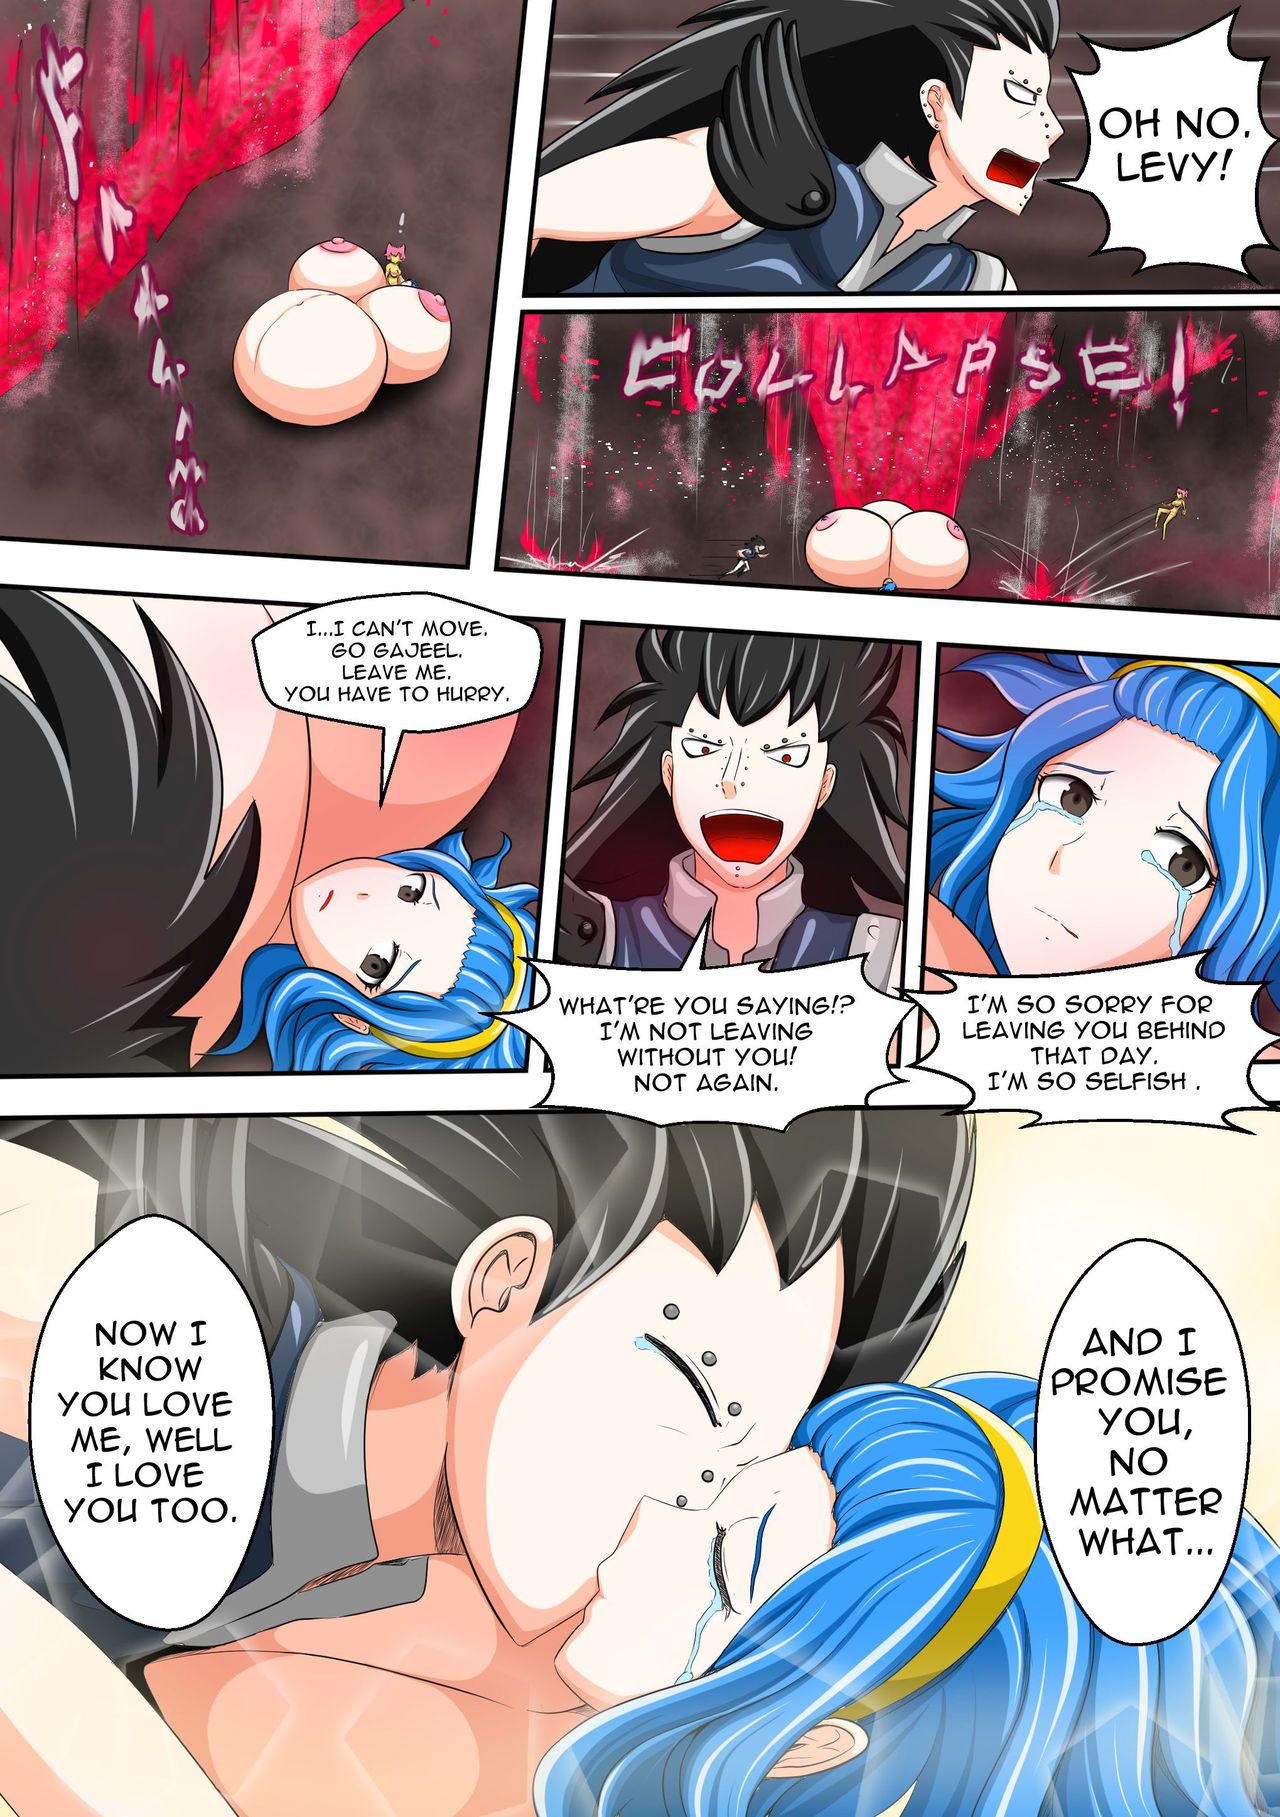 [EscapeFromExpansion] A Huger Game (Fairy Tail) [Ongoing] 107